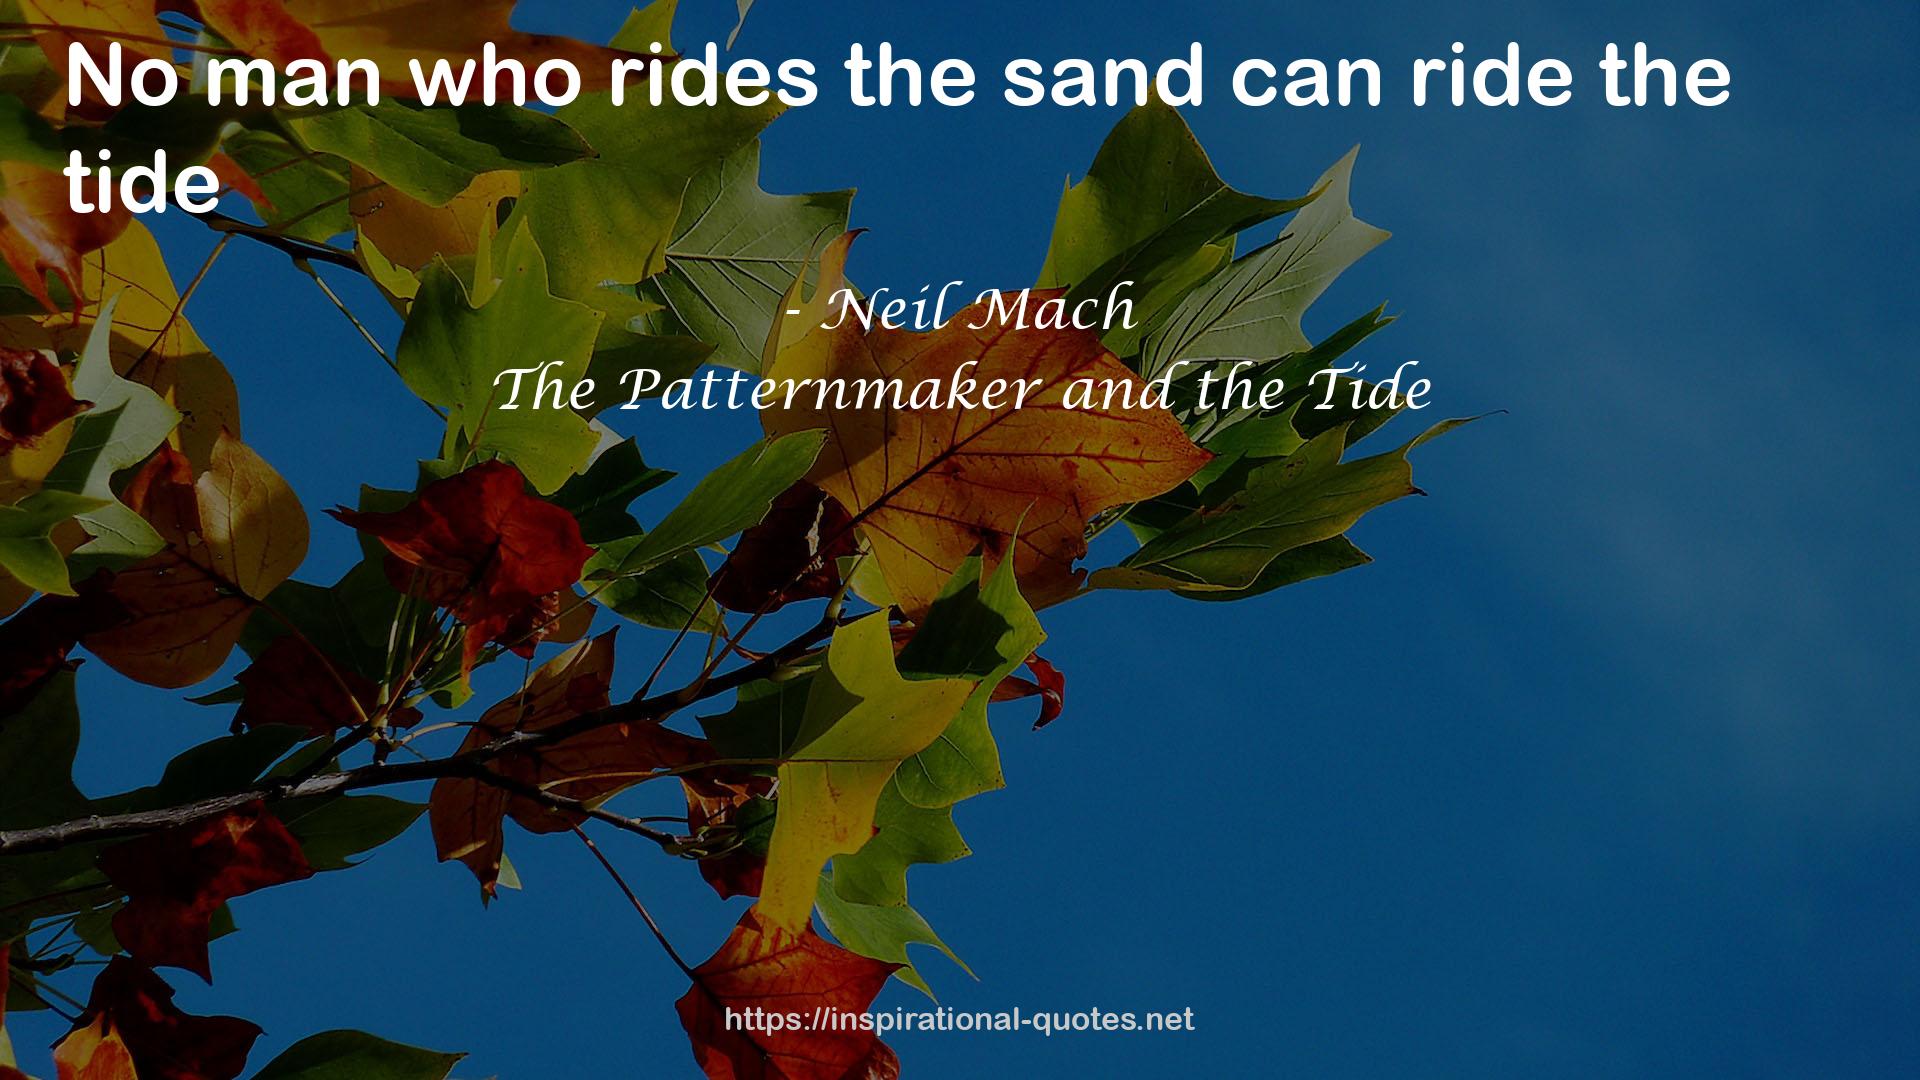 The Patternmaker and the Tide QUOTES